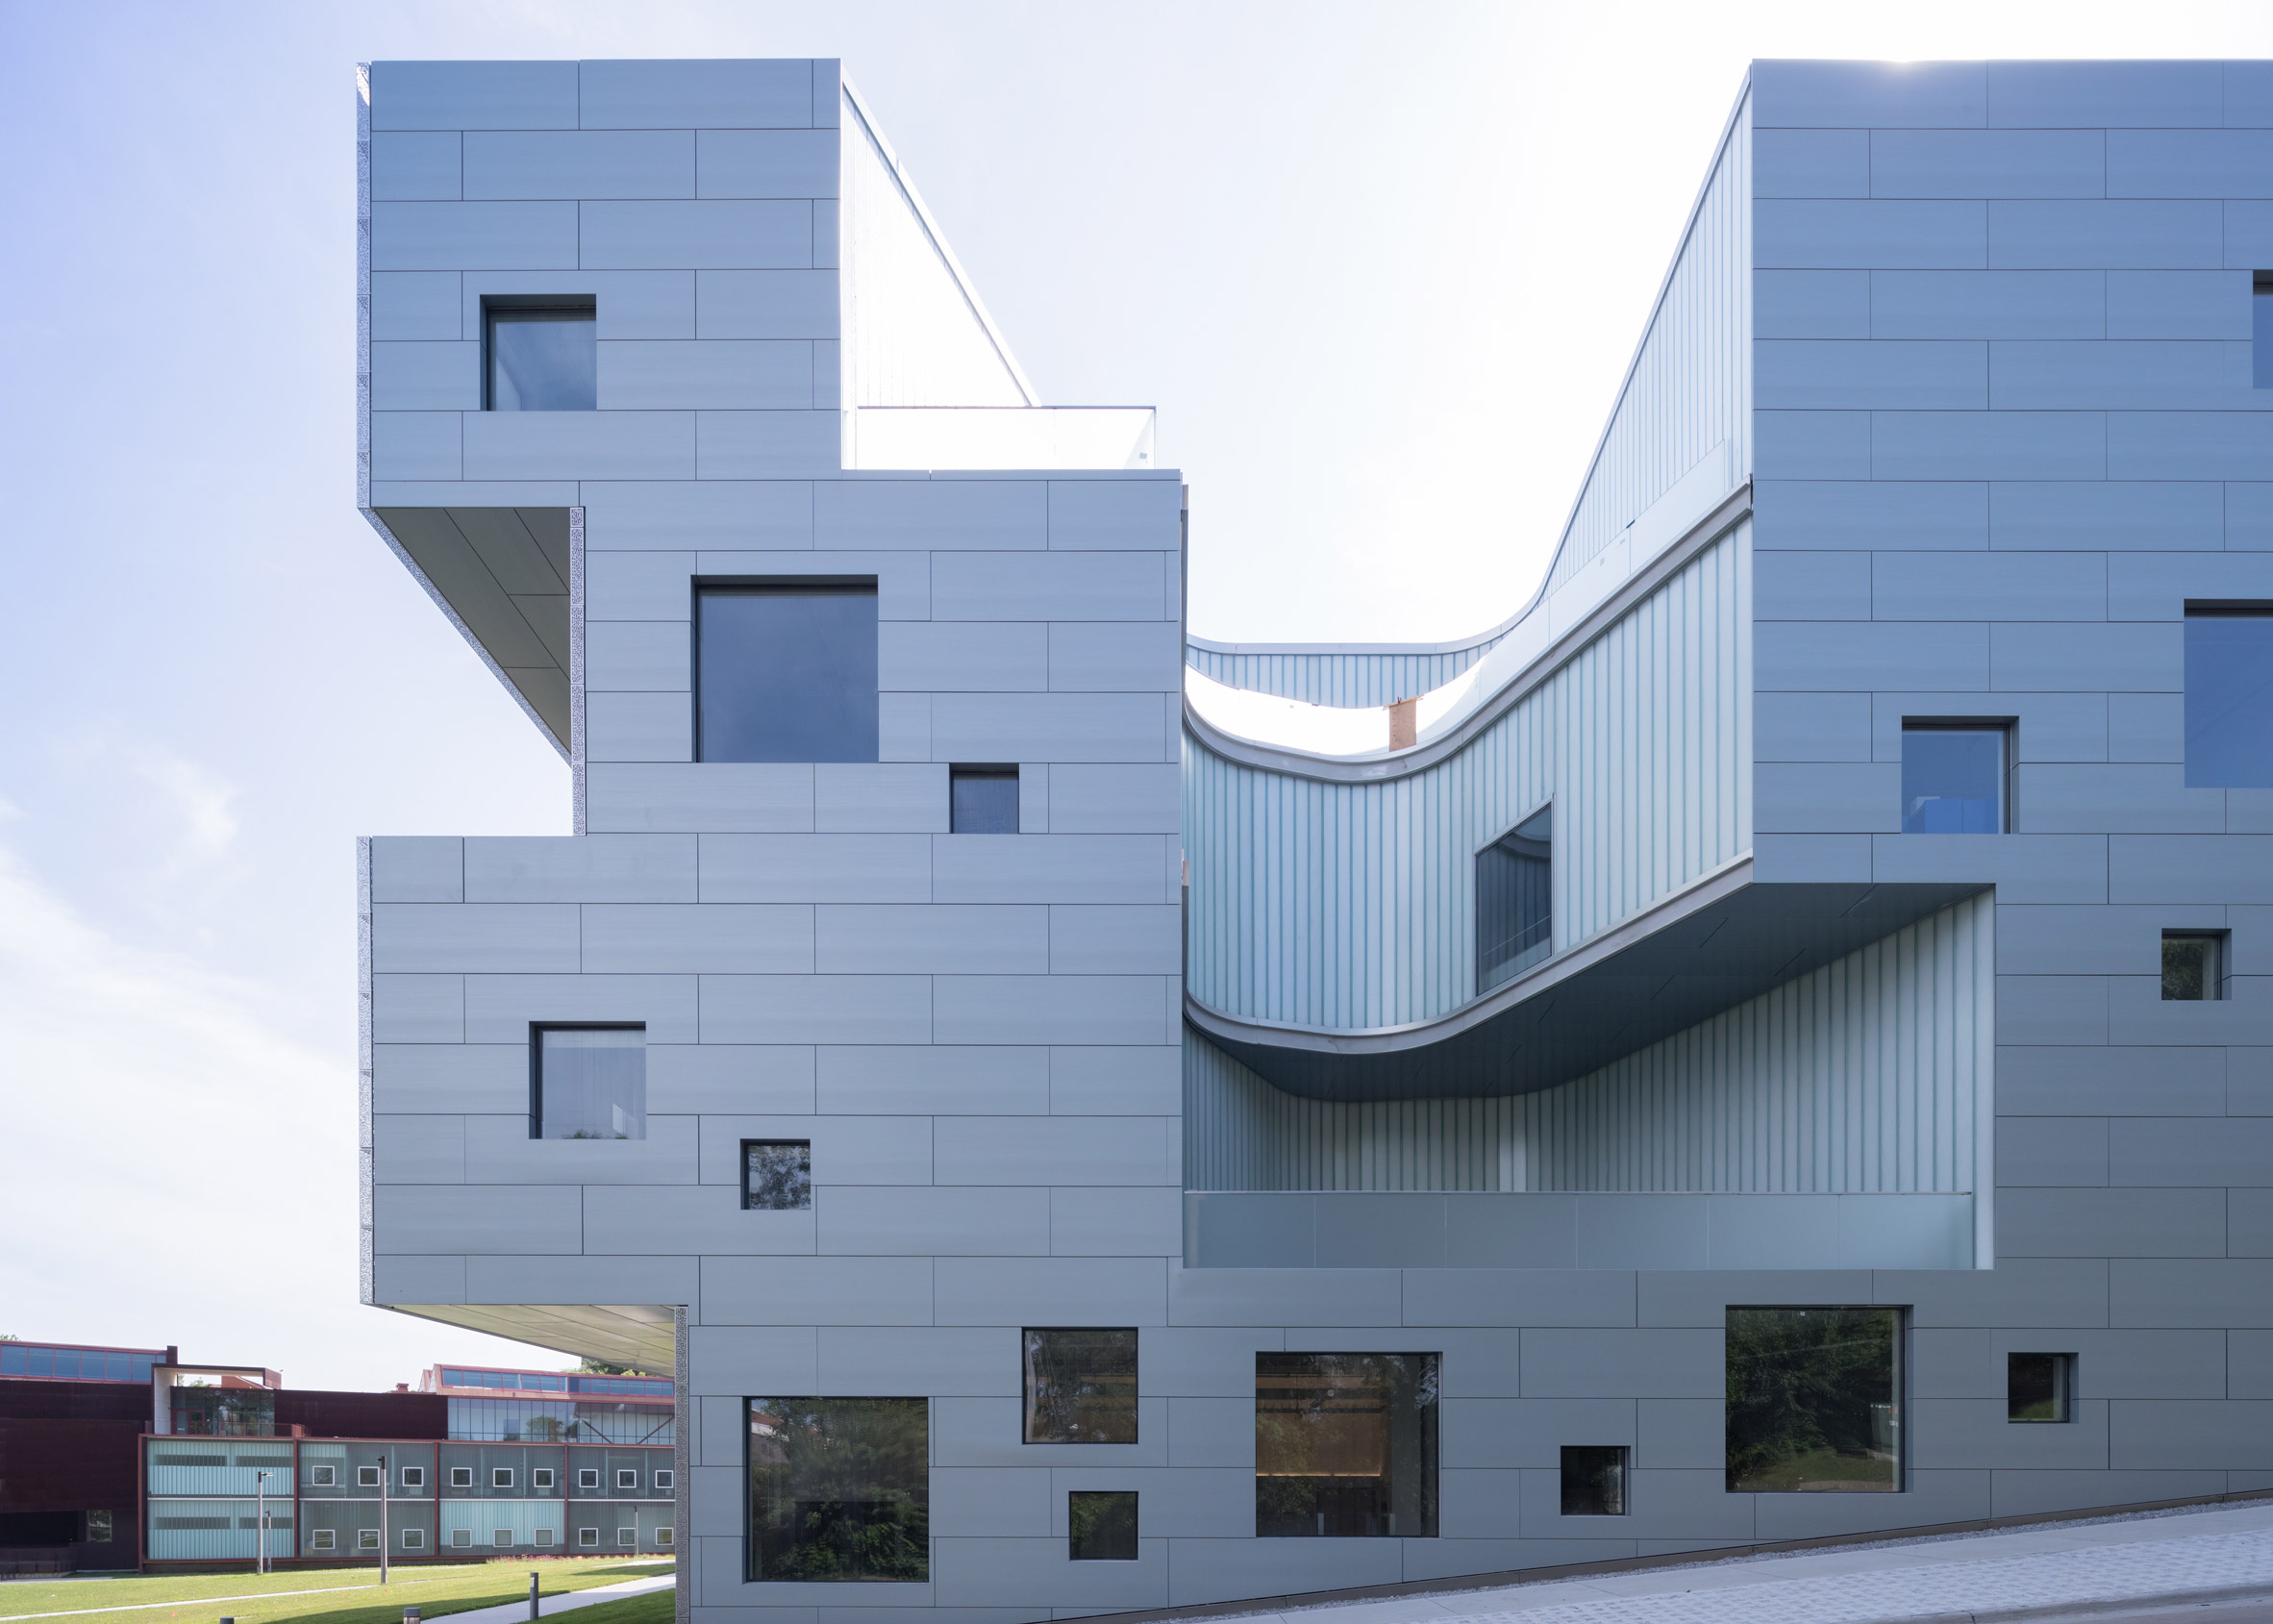 Visual Arts building by Steven Holl